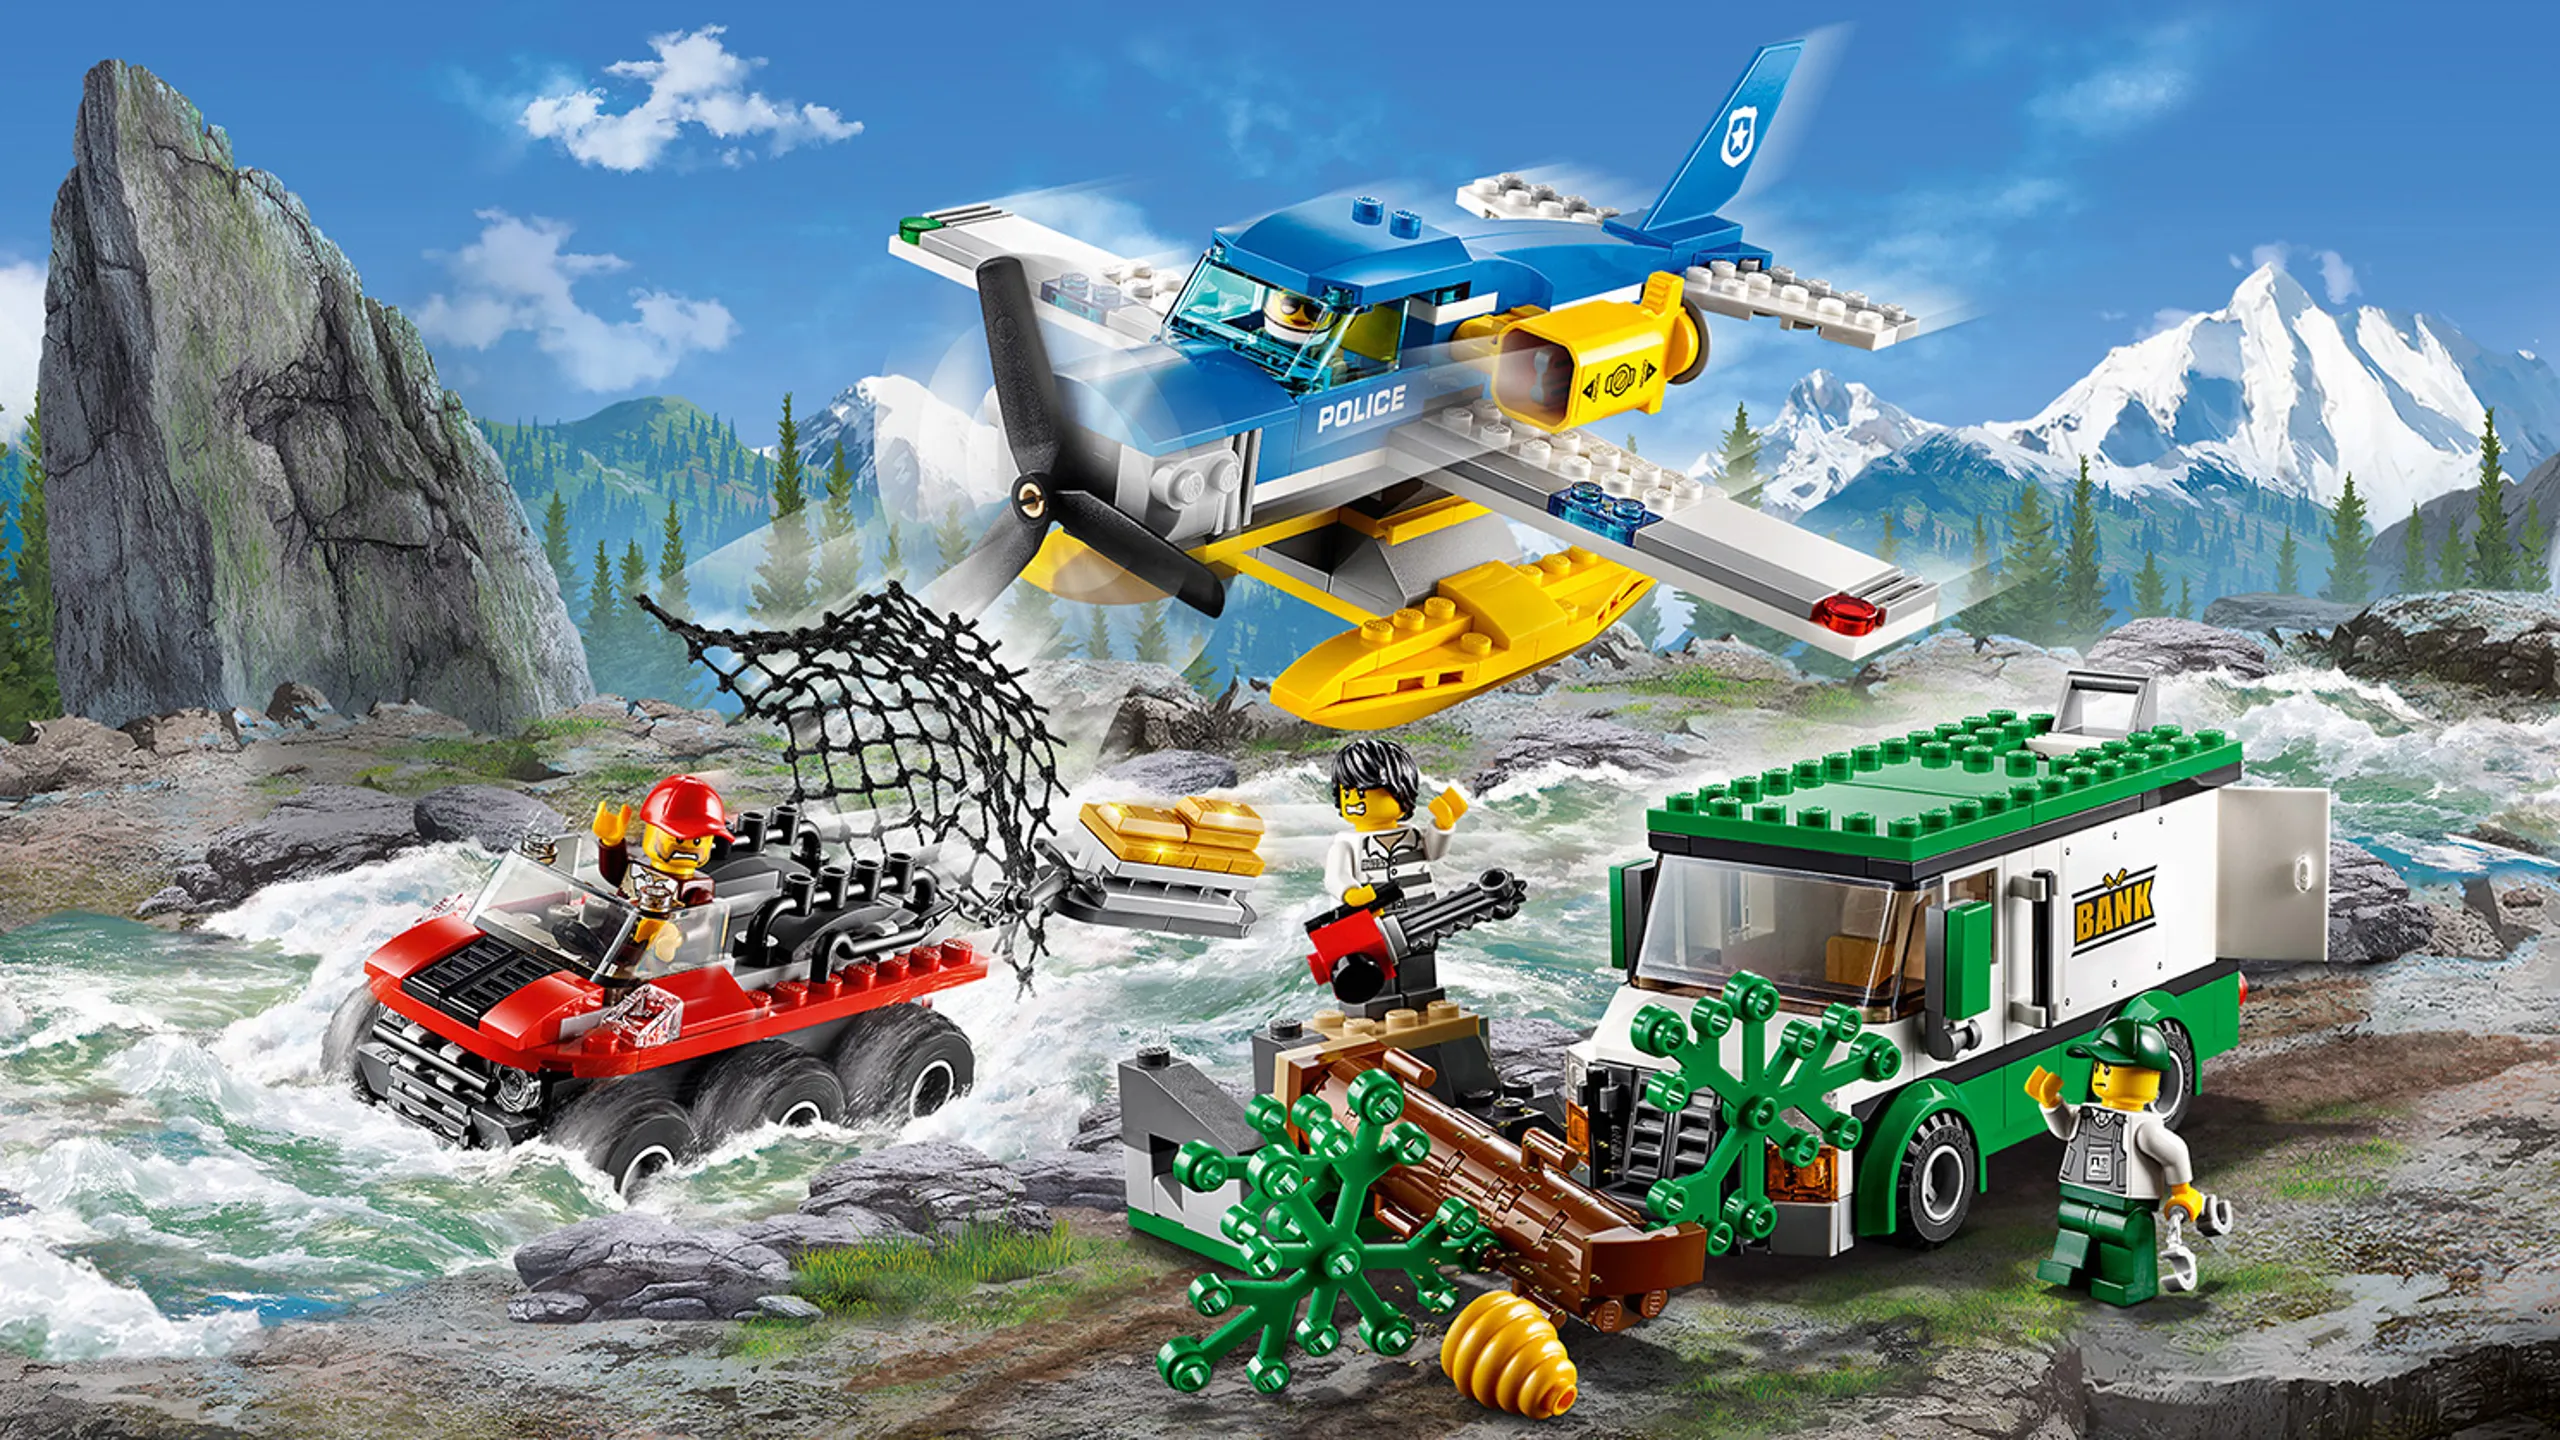 LEGO City Mountain Police - 60175 Mountain River Heist - The police uses their special plane to throw a net down over a crook escaping on the river.